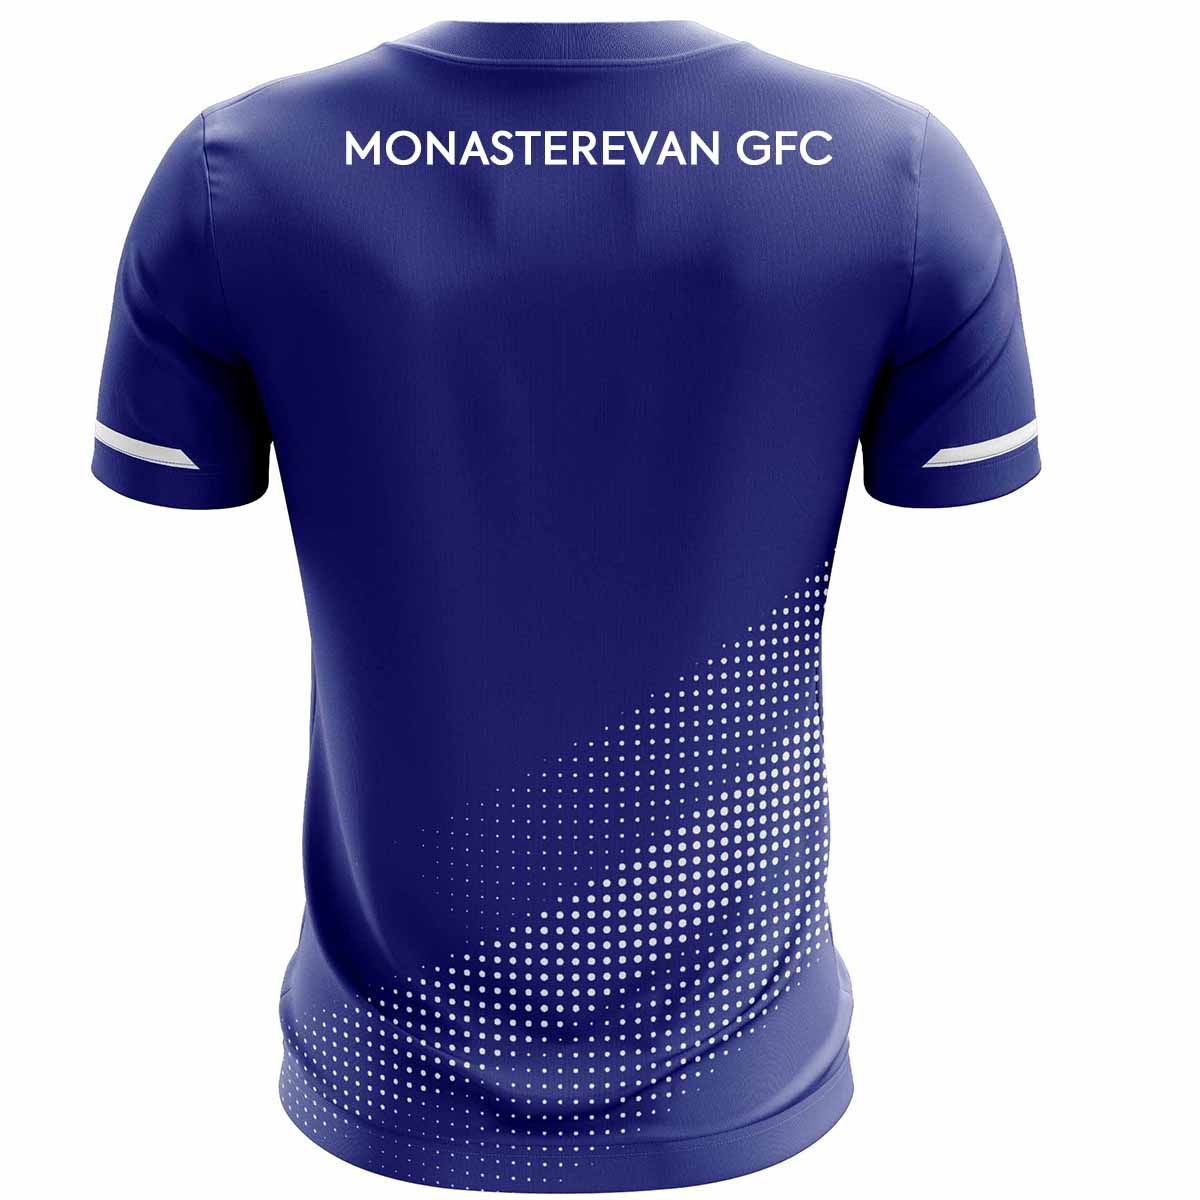 Mc Keever Monasterevan GFC Playing Jersey 2 - Youth - Royal